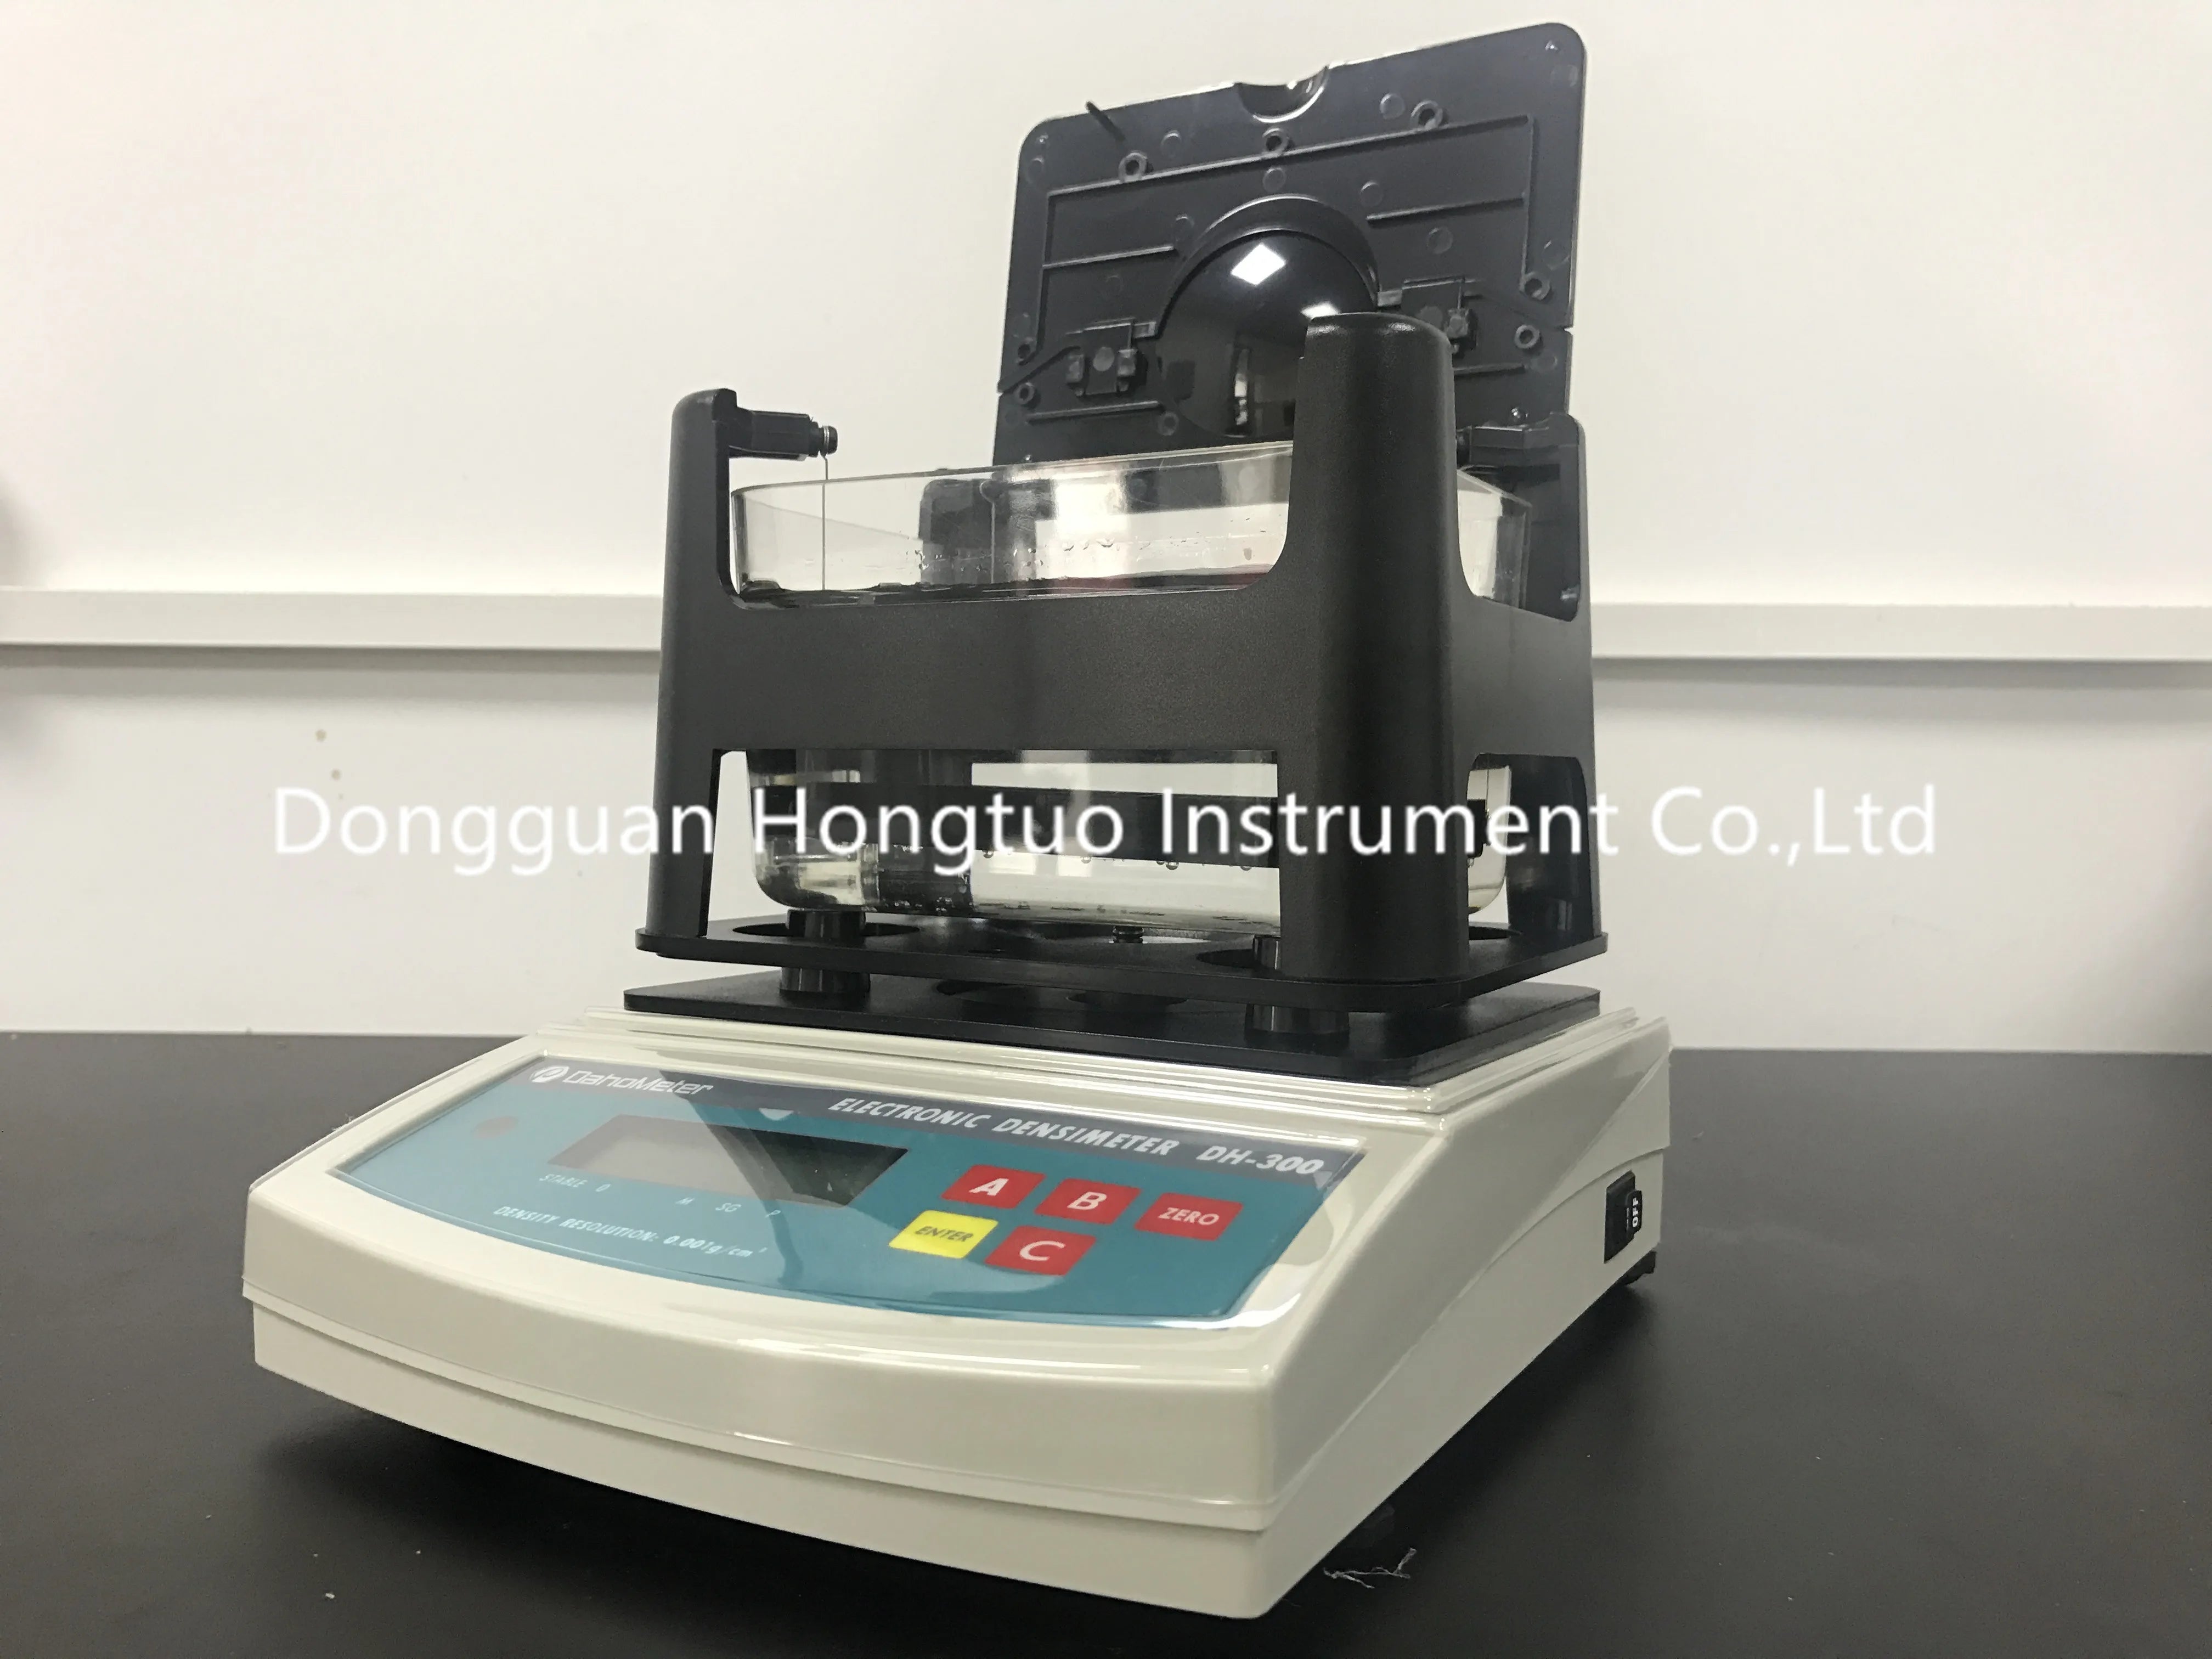 DH-300 Digital Solid Density Meter Tester With 0.005~300g Weight RS232 Interface Densitometer Testing Machine